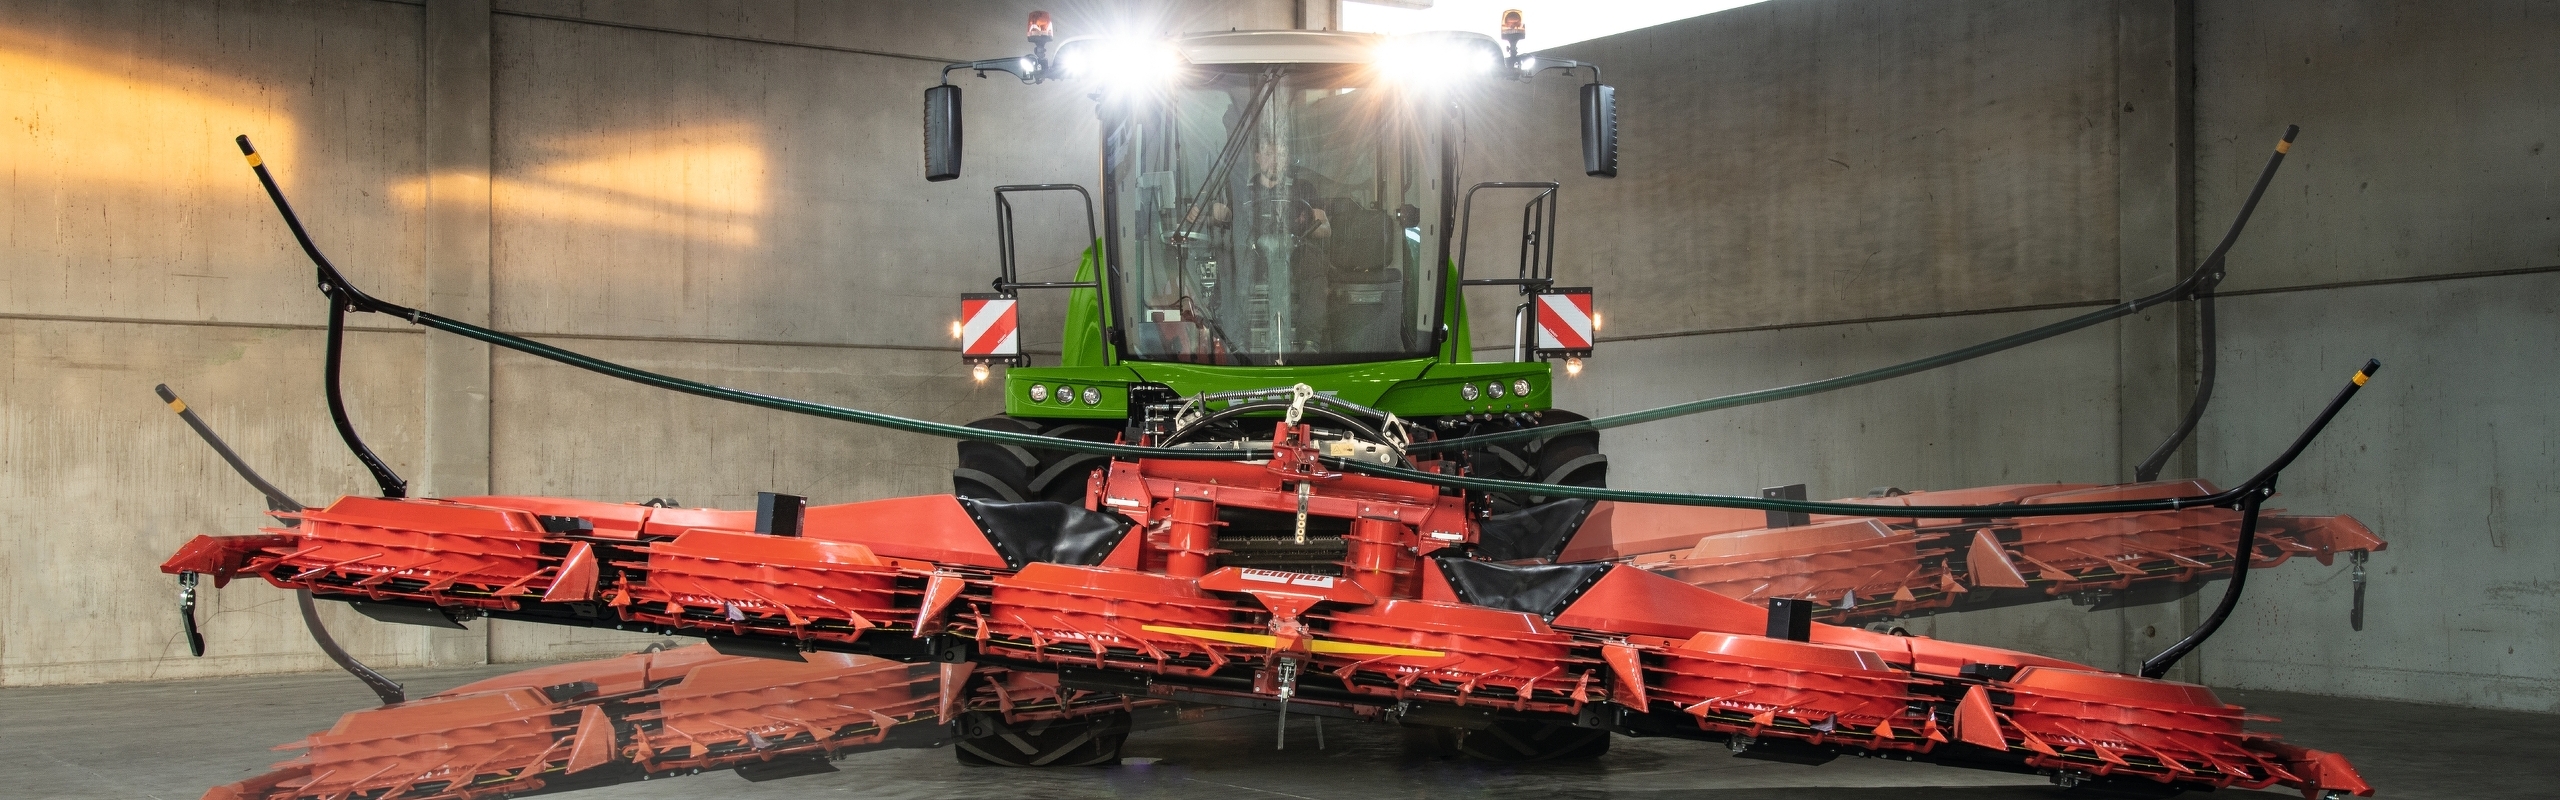 Fendt Katana with attachment is in the spotlight